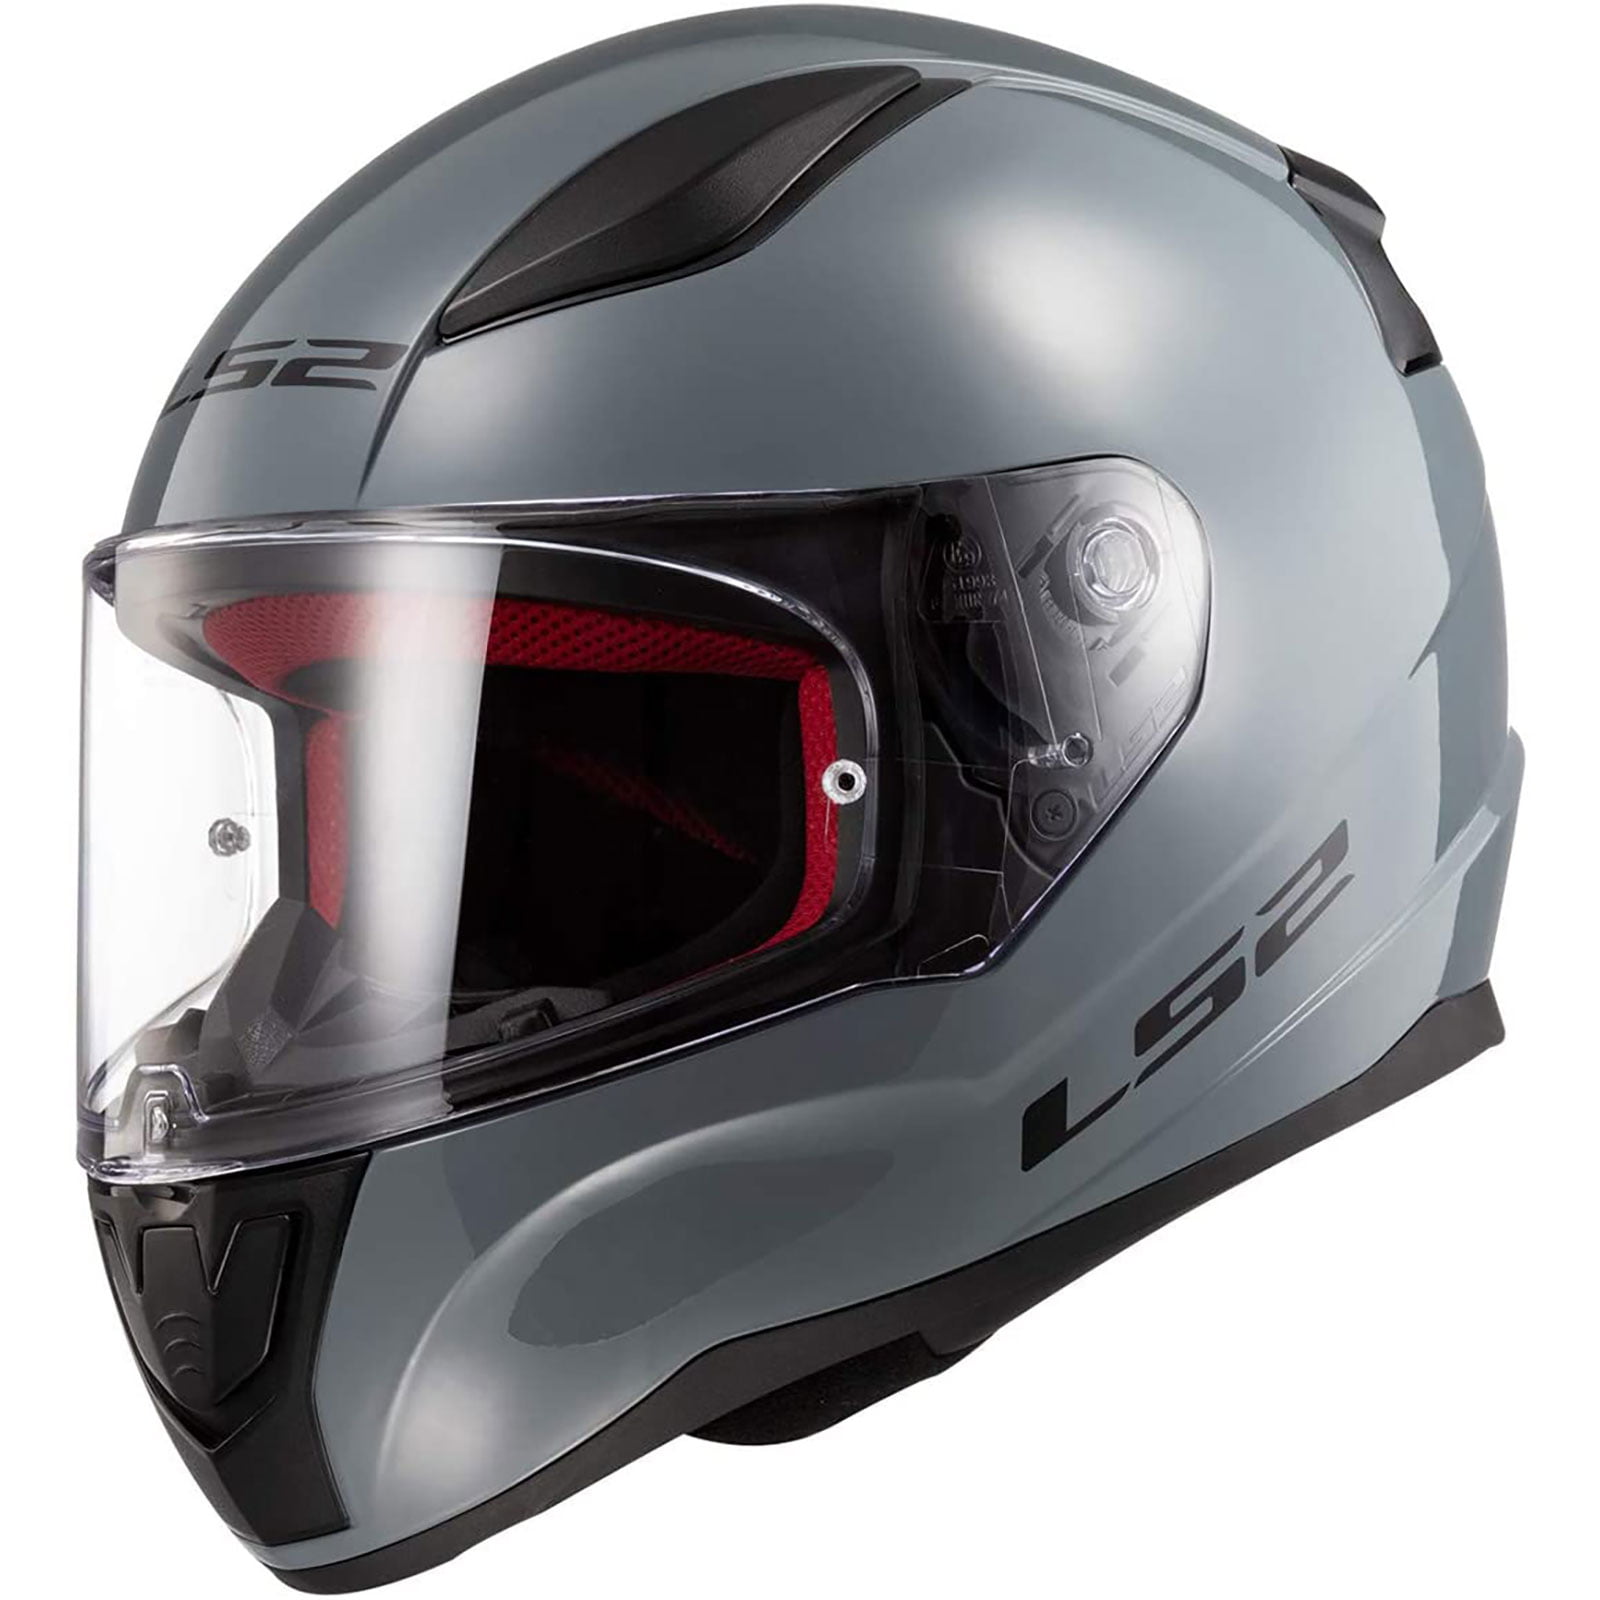 GMAX GM-49Y Deflect Youth Full-Face Street Motorcycle Helmet